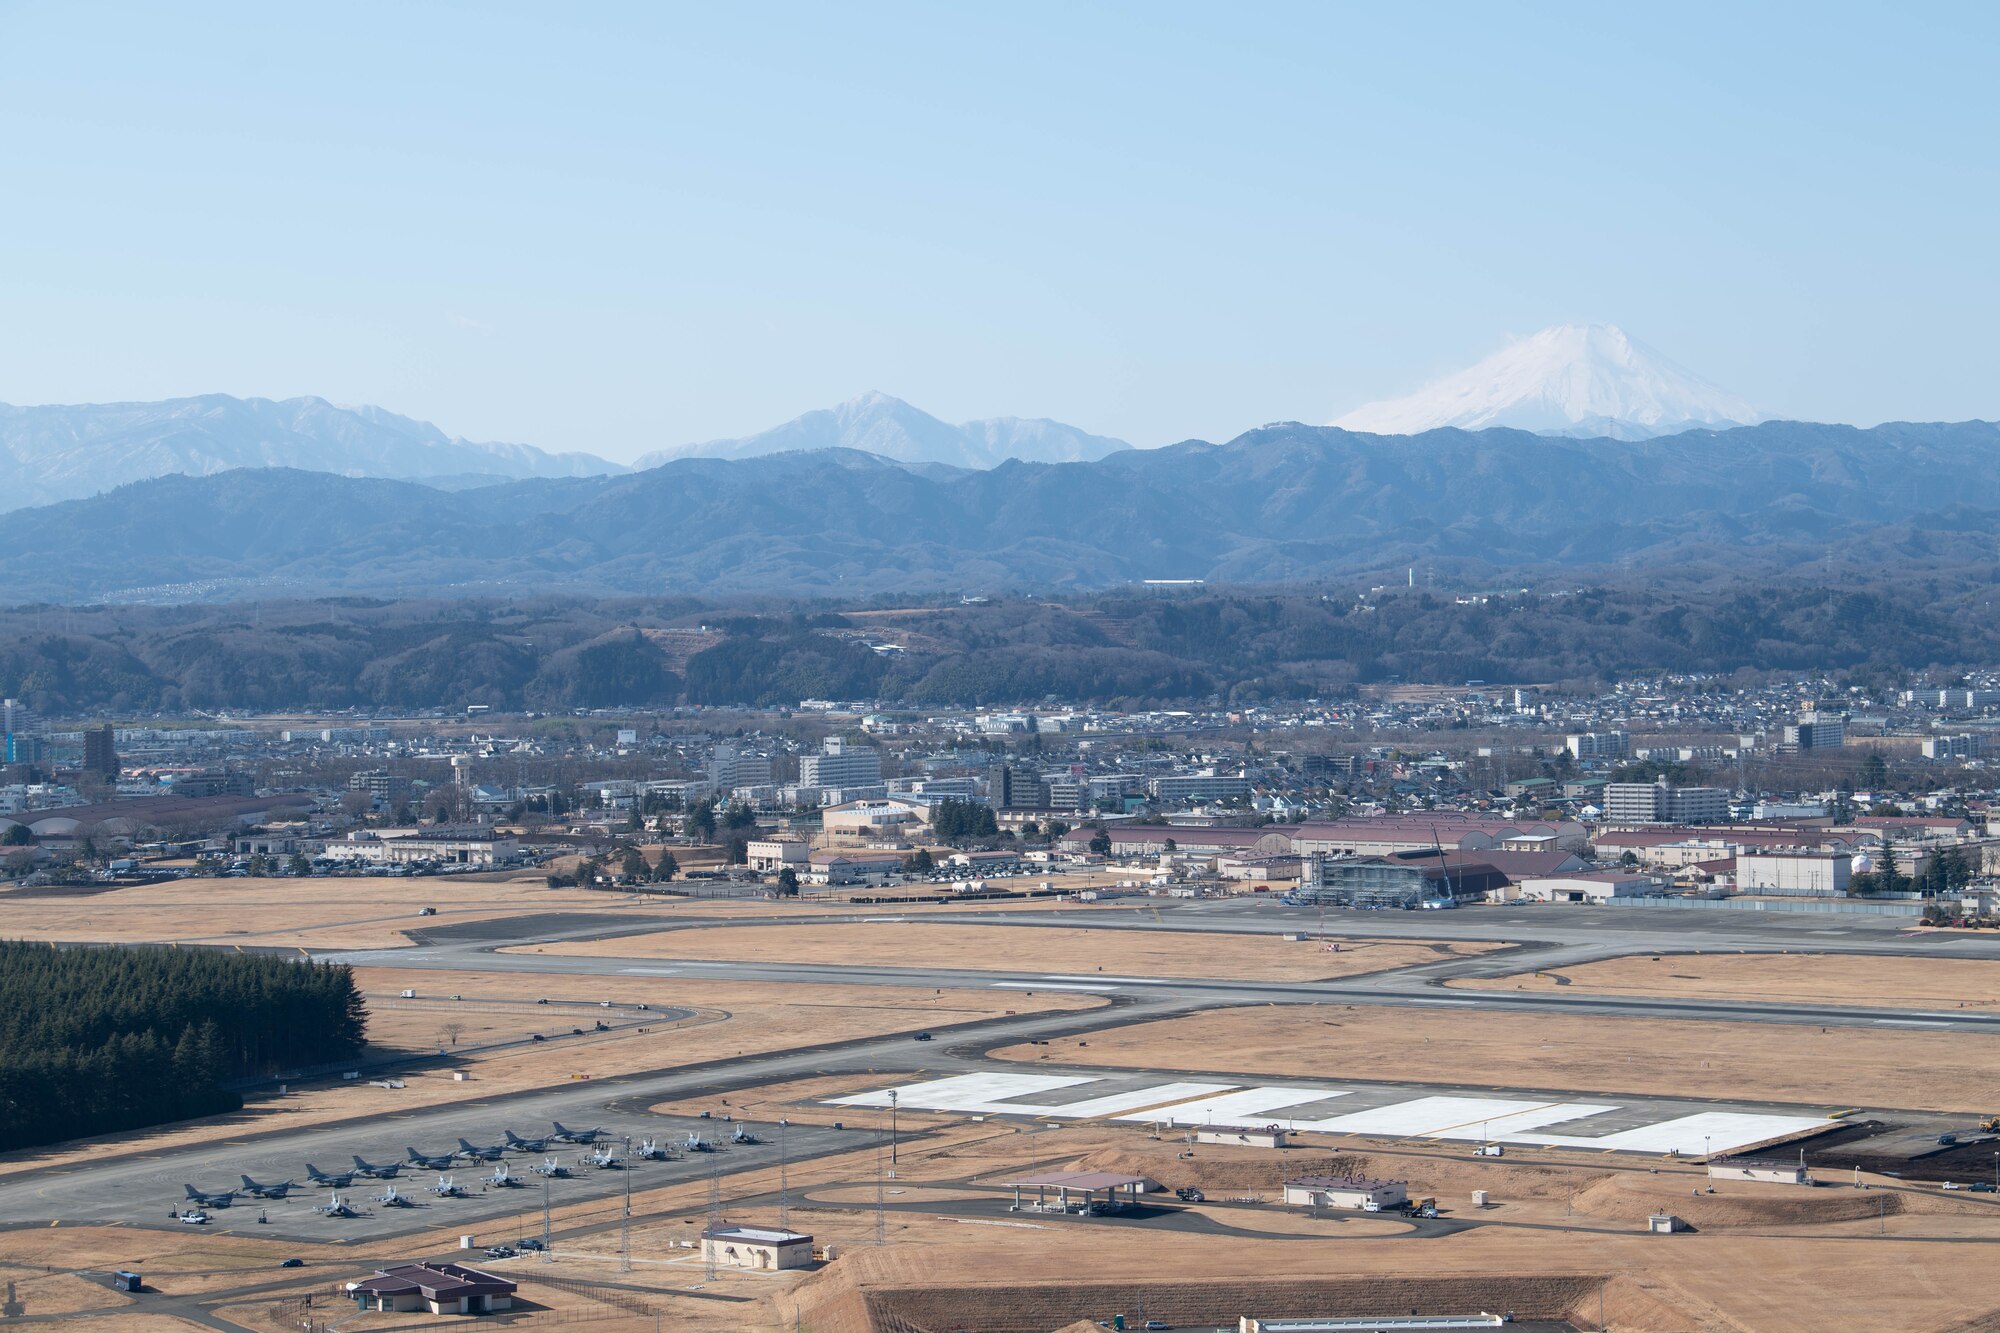 A wide photograph of the Yokota Air Base flightline, with the city behind it and the mountains beyond that. 15 F-16s sit on the flightline in the foreground.